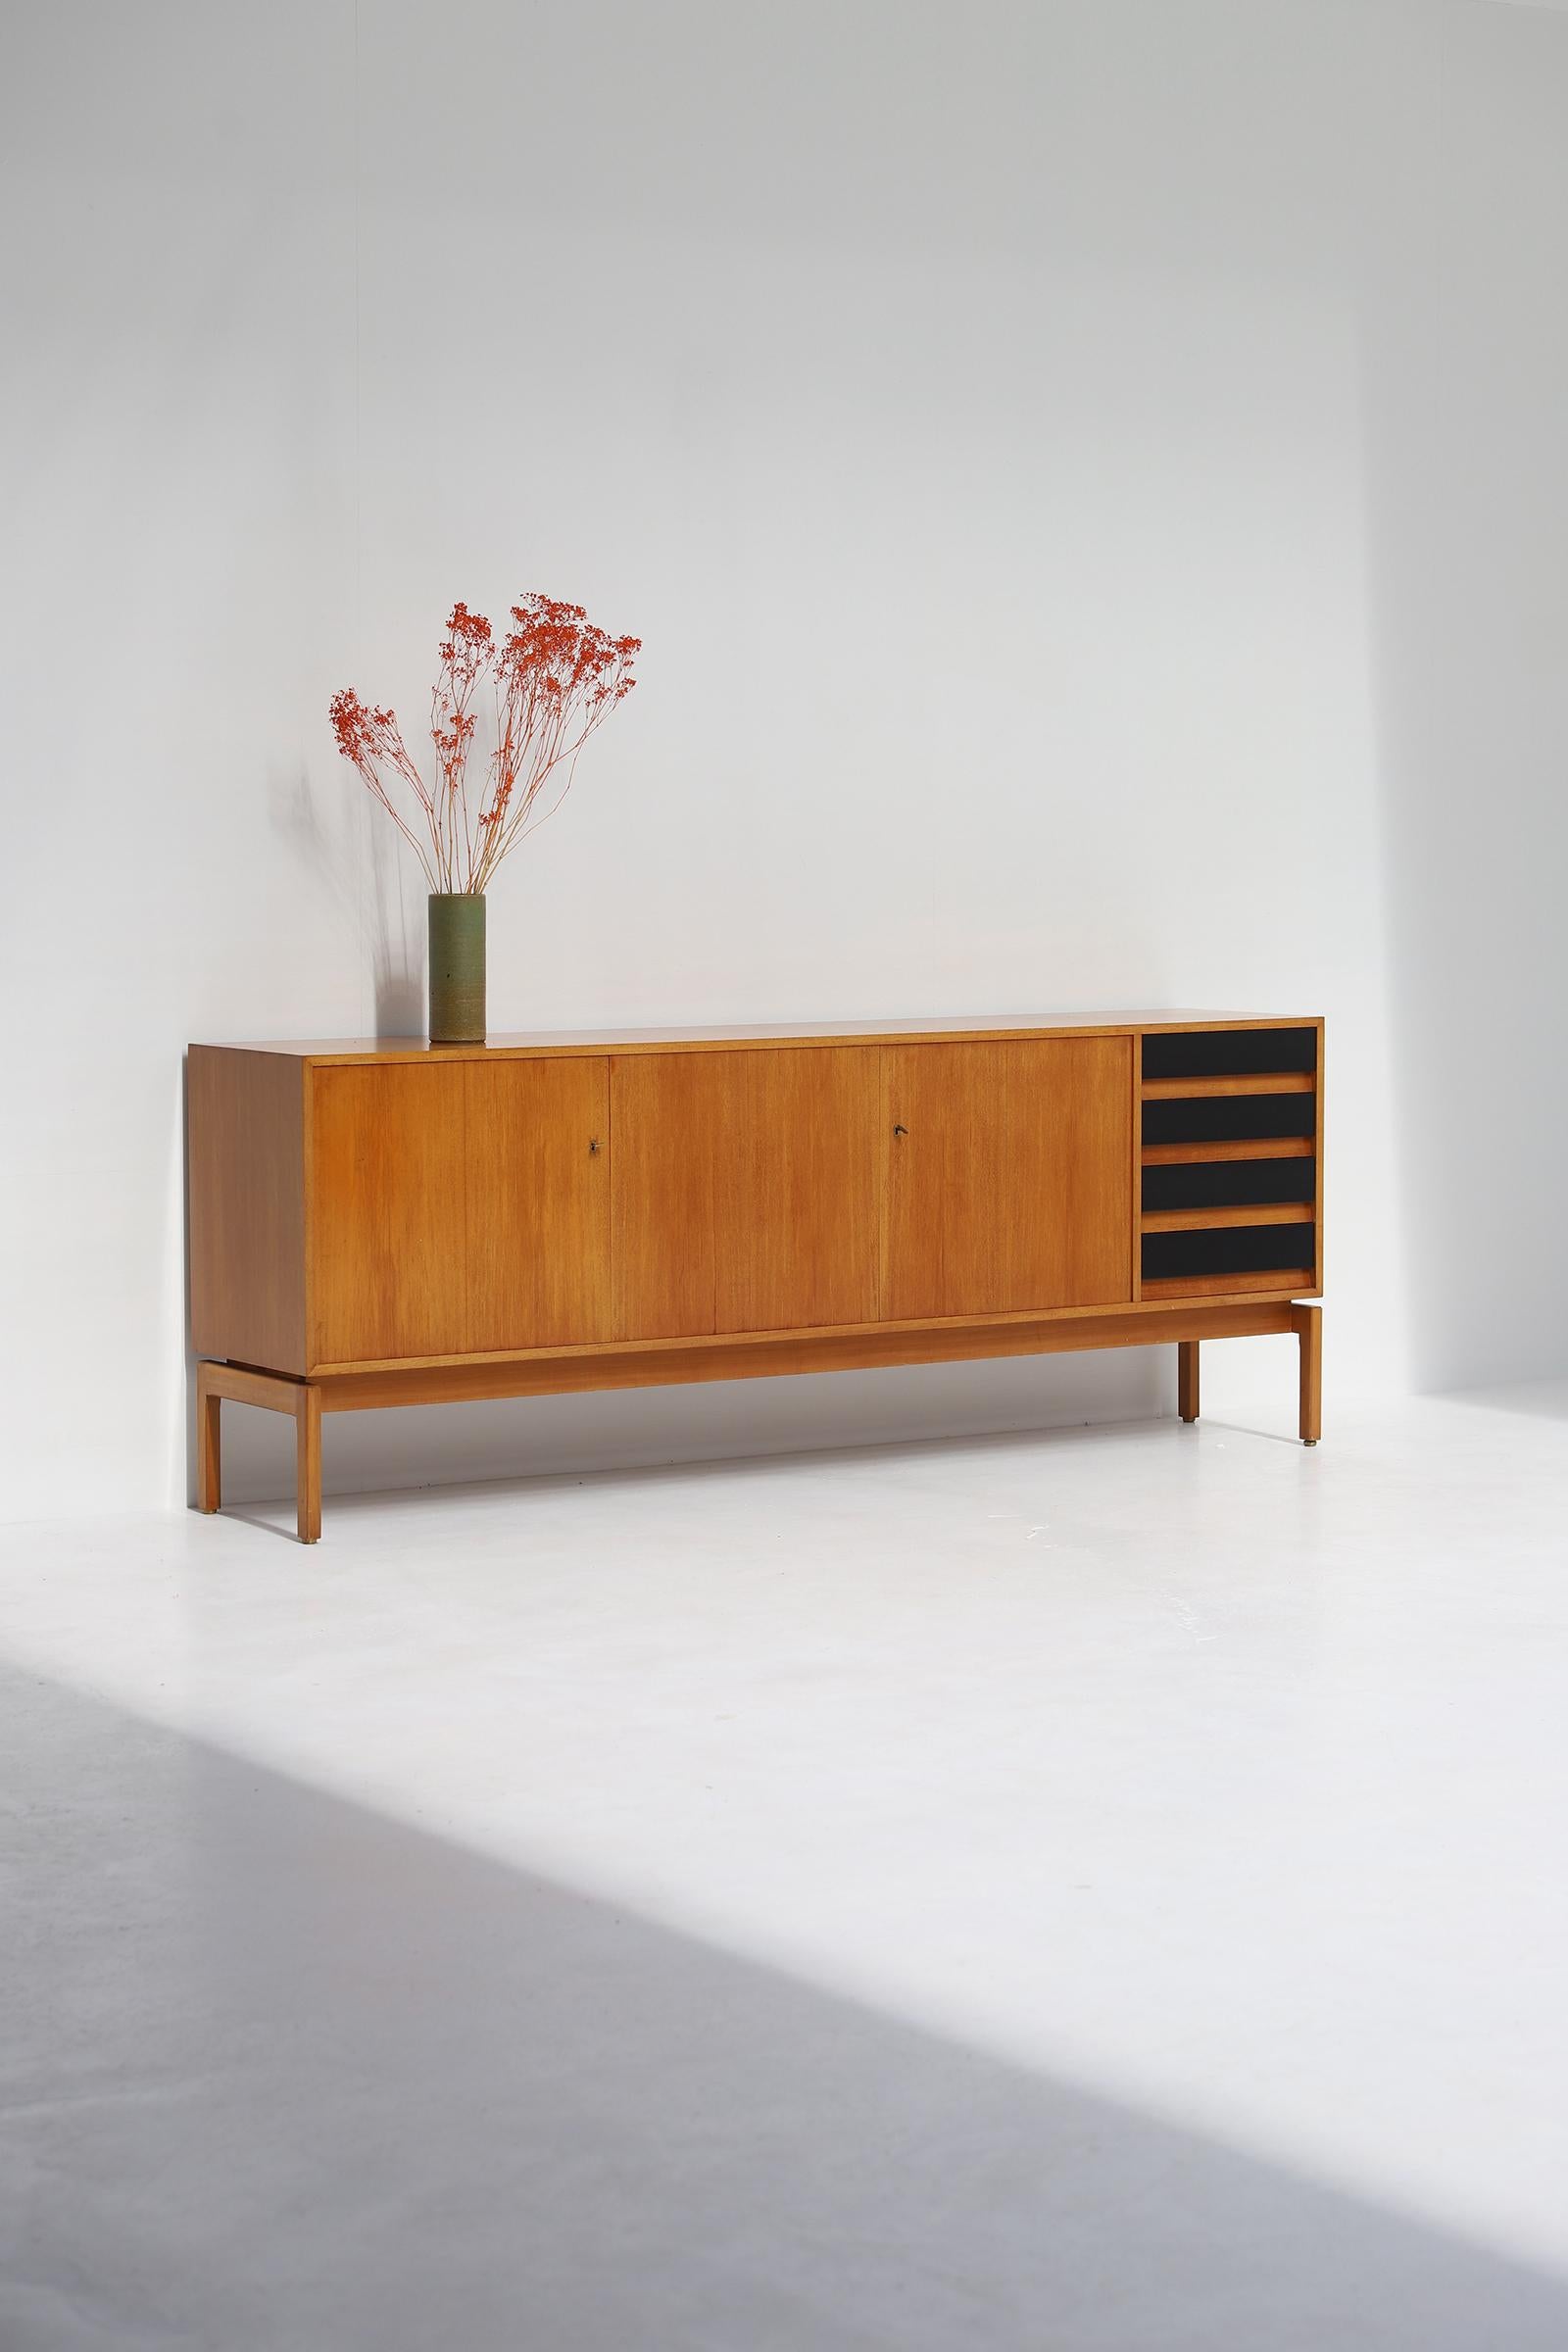 Jos De Mey sideboard manufactured in the 1960s by Van den Berghe Pauvers Gent, Belgium. The sideboard is made in a dark honey colored wood detailed with a brass key and black lacquered drawers. Behind the 3 doors there is plenty of storage space.